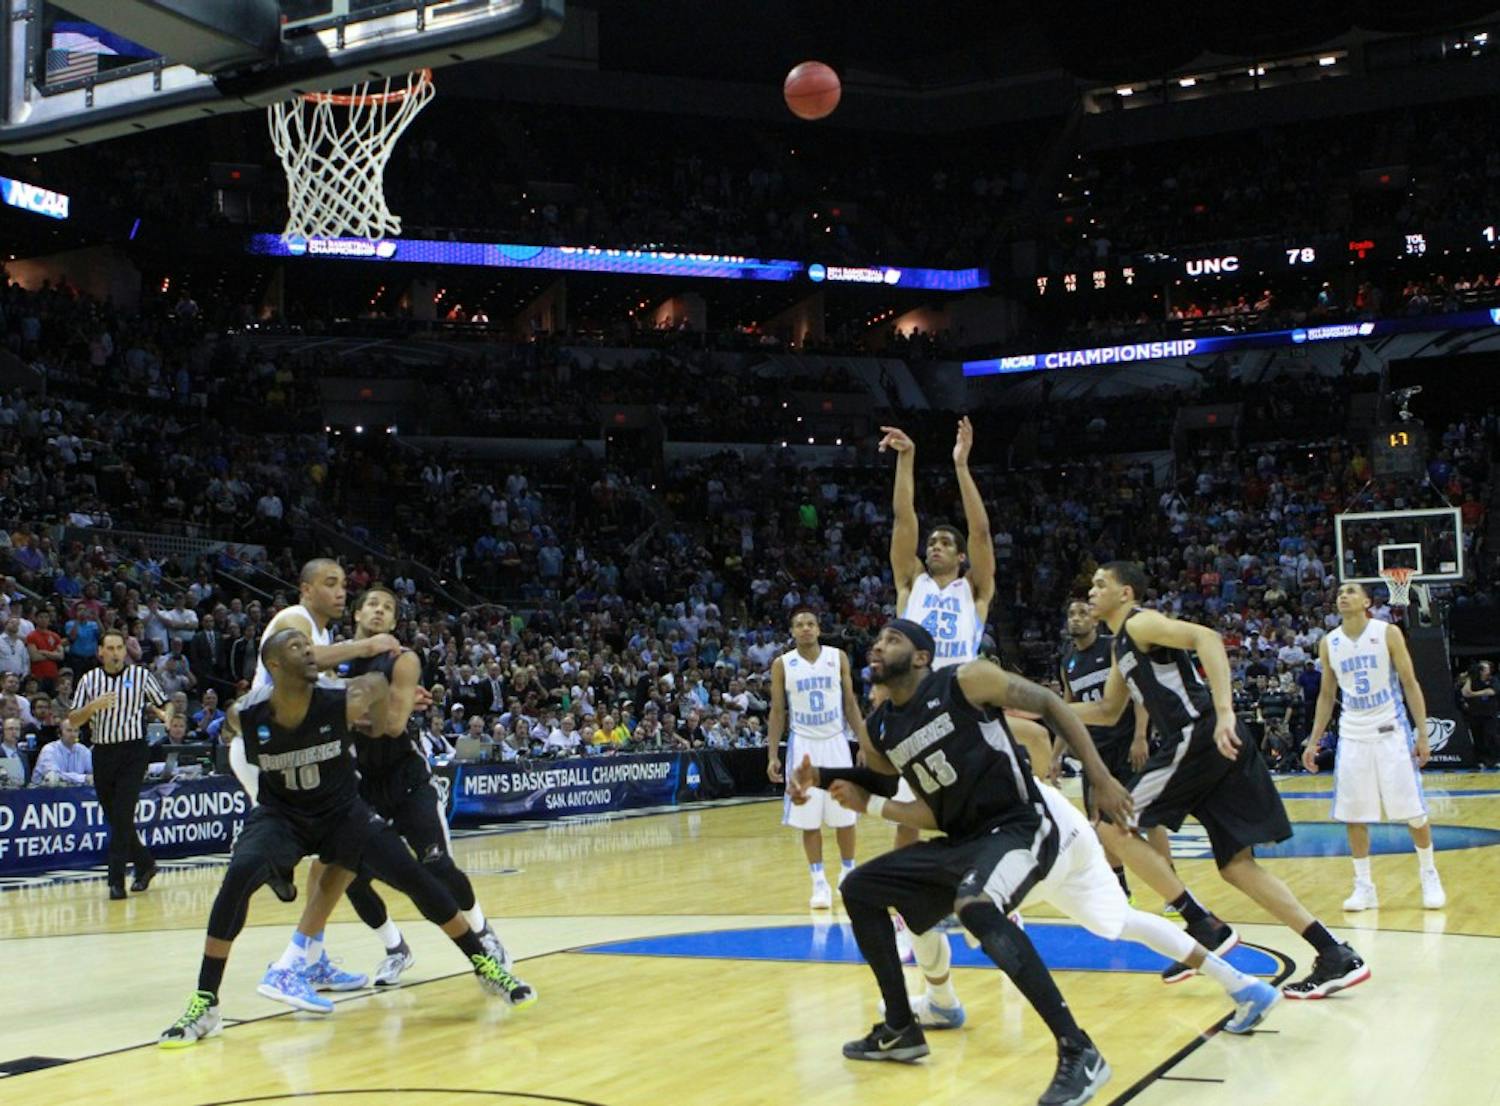 James Michael McAdoo hits a free throw to put UNC up two points to win the game. UNC defeated Providence 79-77 in the second round of the NCAA tournament at the AT&T Center in San Antonio, TX. The Tar Heels advance to play in the third round on Sunday.